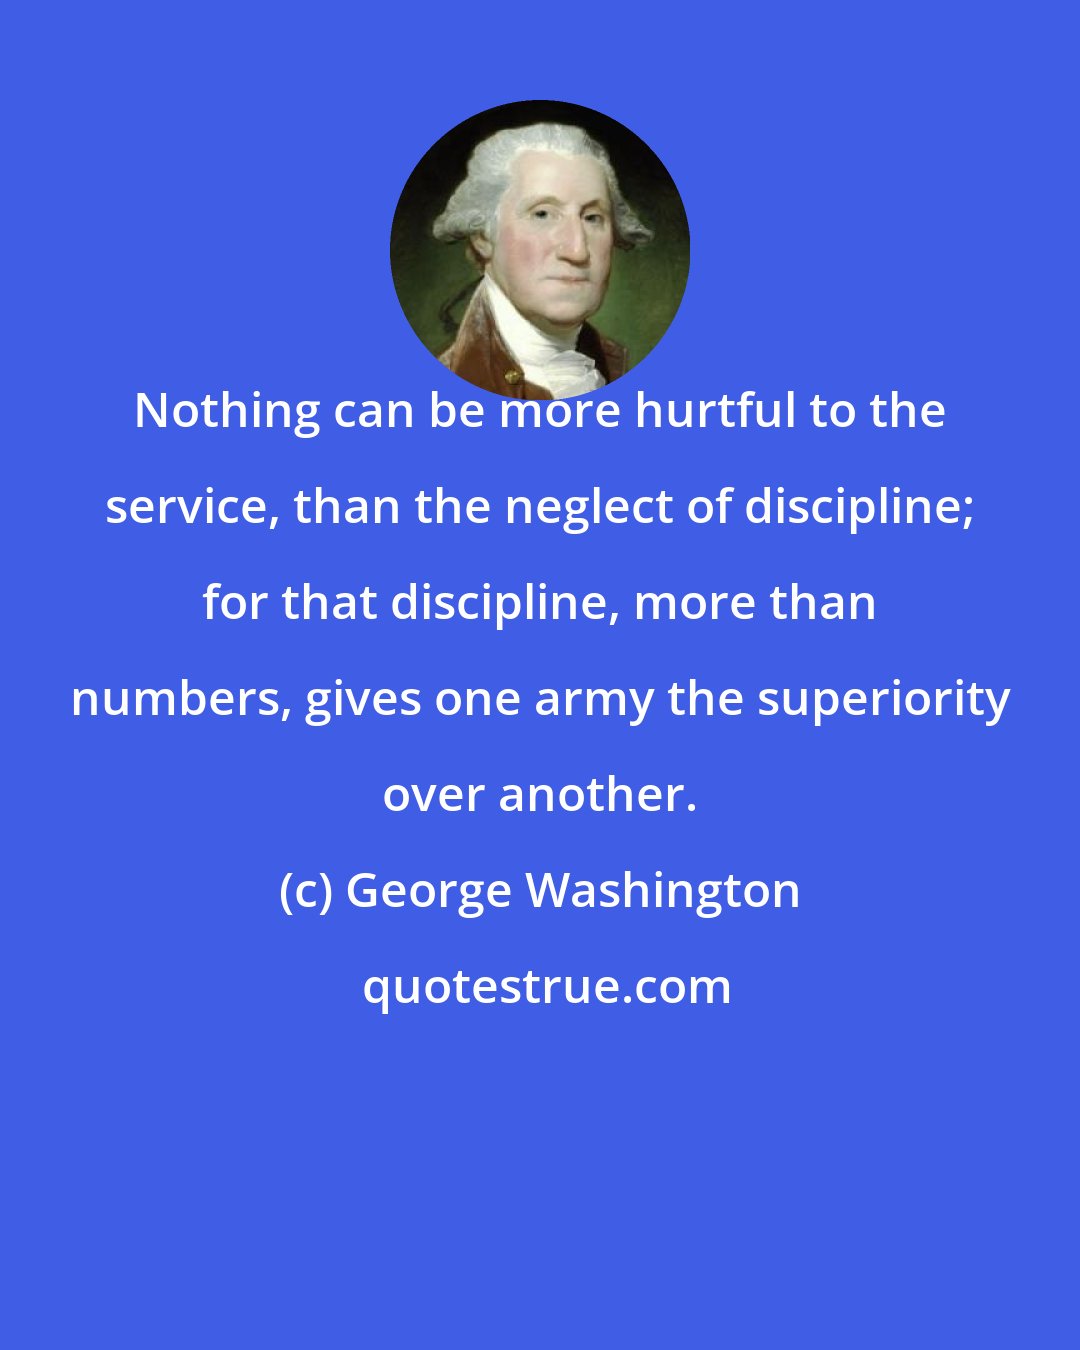 George Washington: Nothing can be more hurtful to the service, than the neglect of discipline; for that discipline, more than numbers, gives one army the superiority over another.